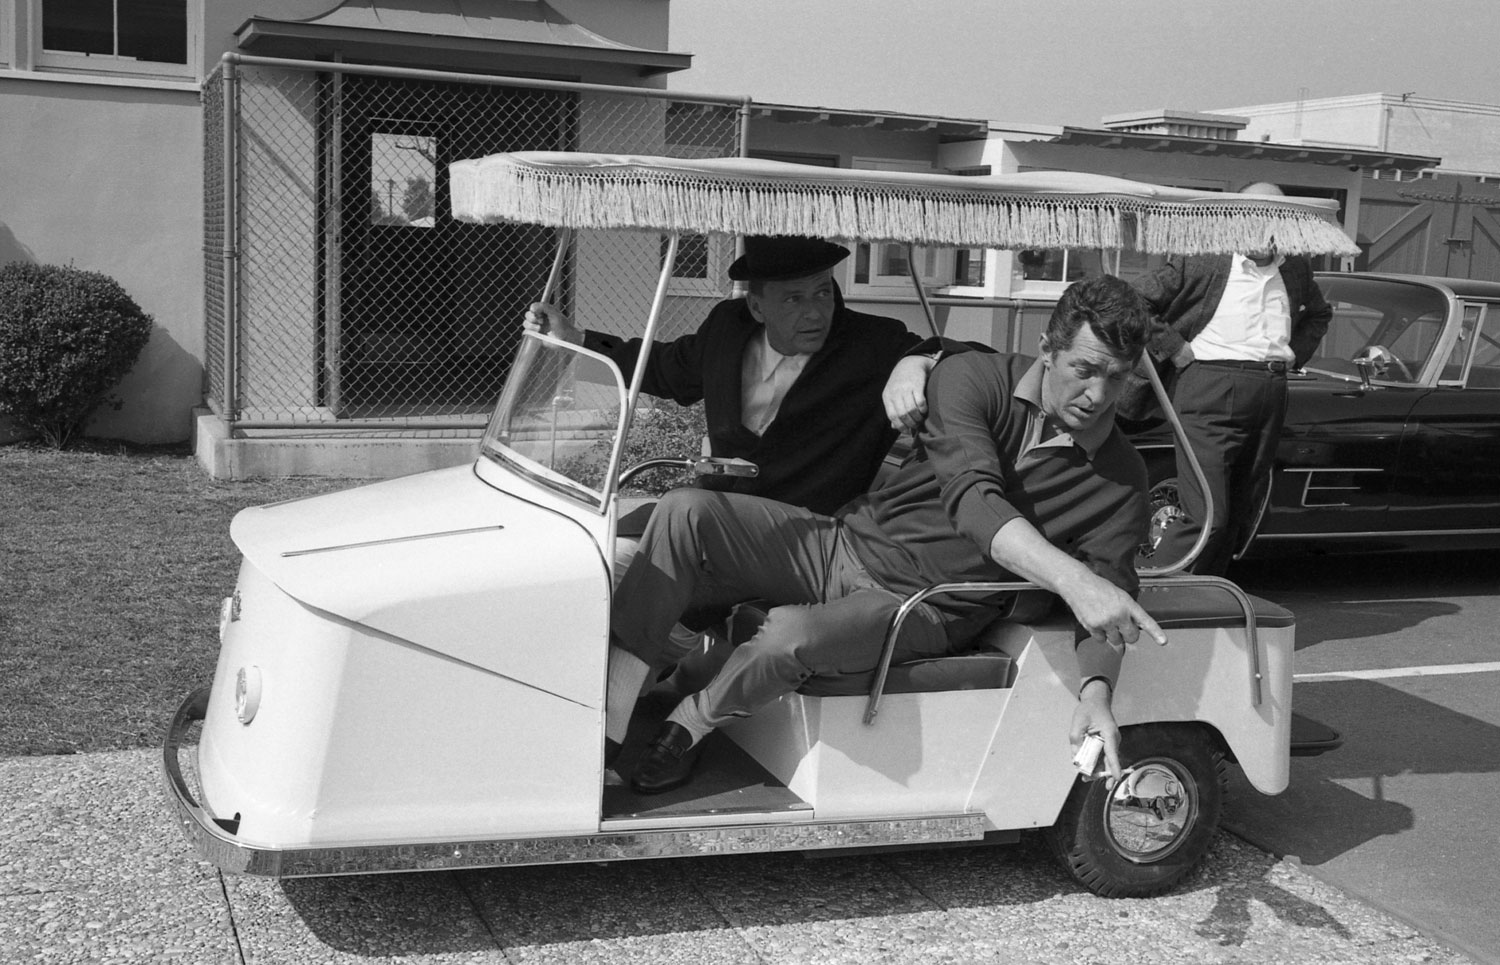 Frank Sinatra and Dean Martin drive a golf cart at Warner Bros. Studio in 1965 while making Marriage on the Rocks.